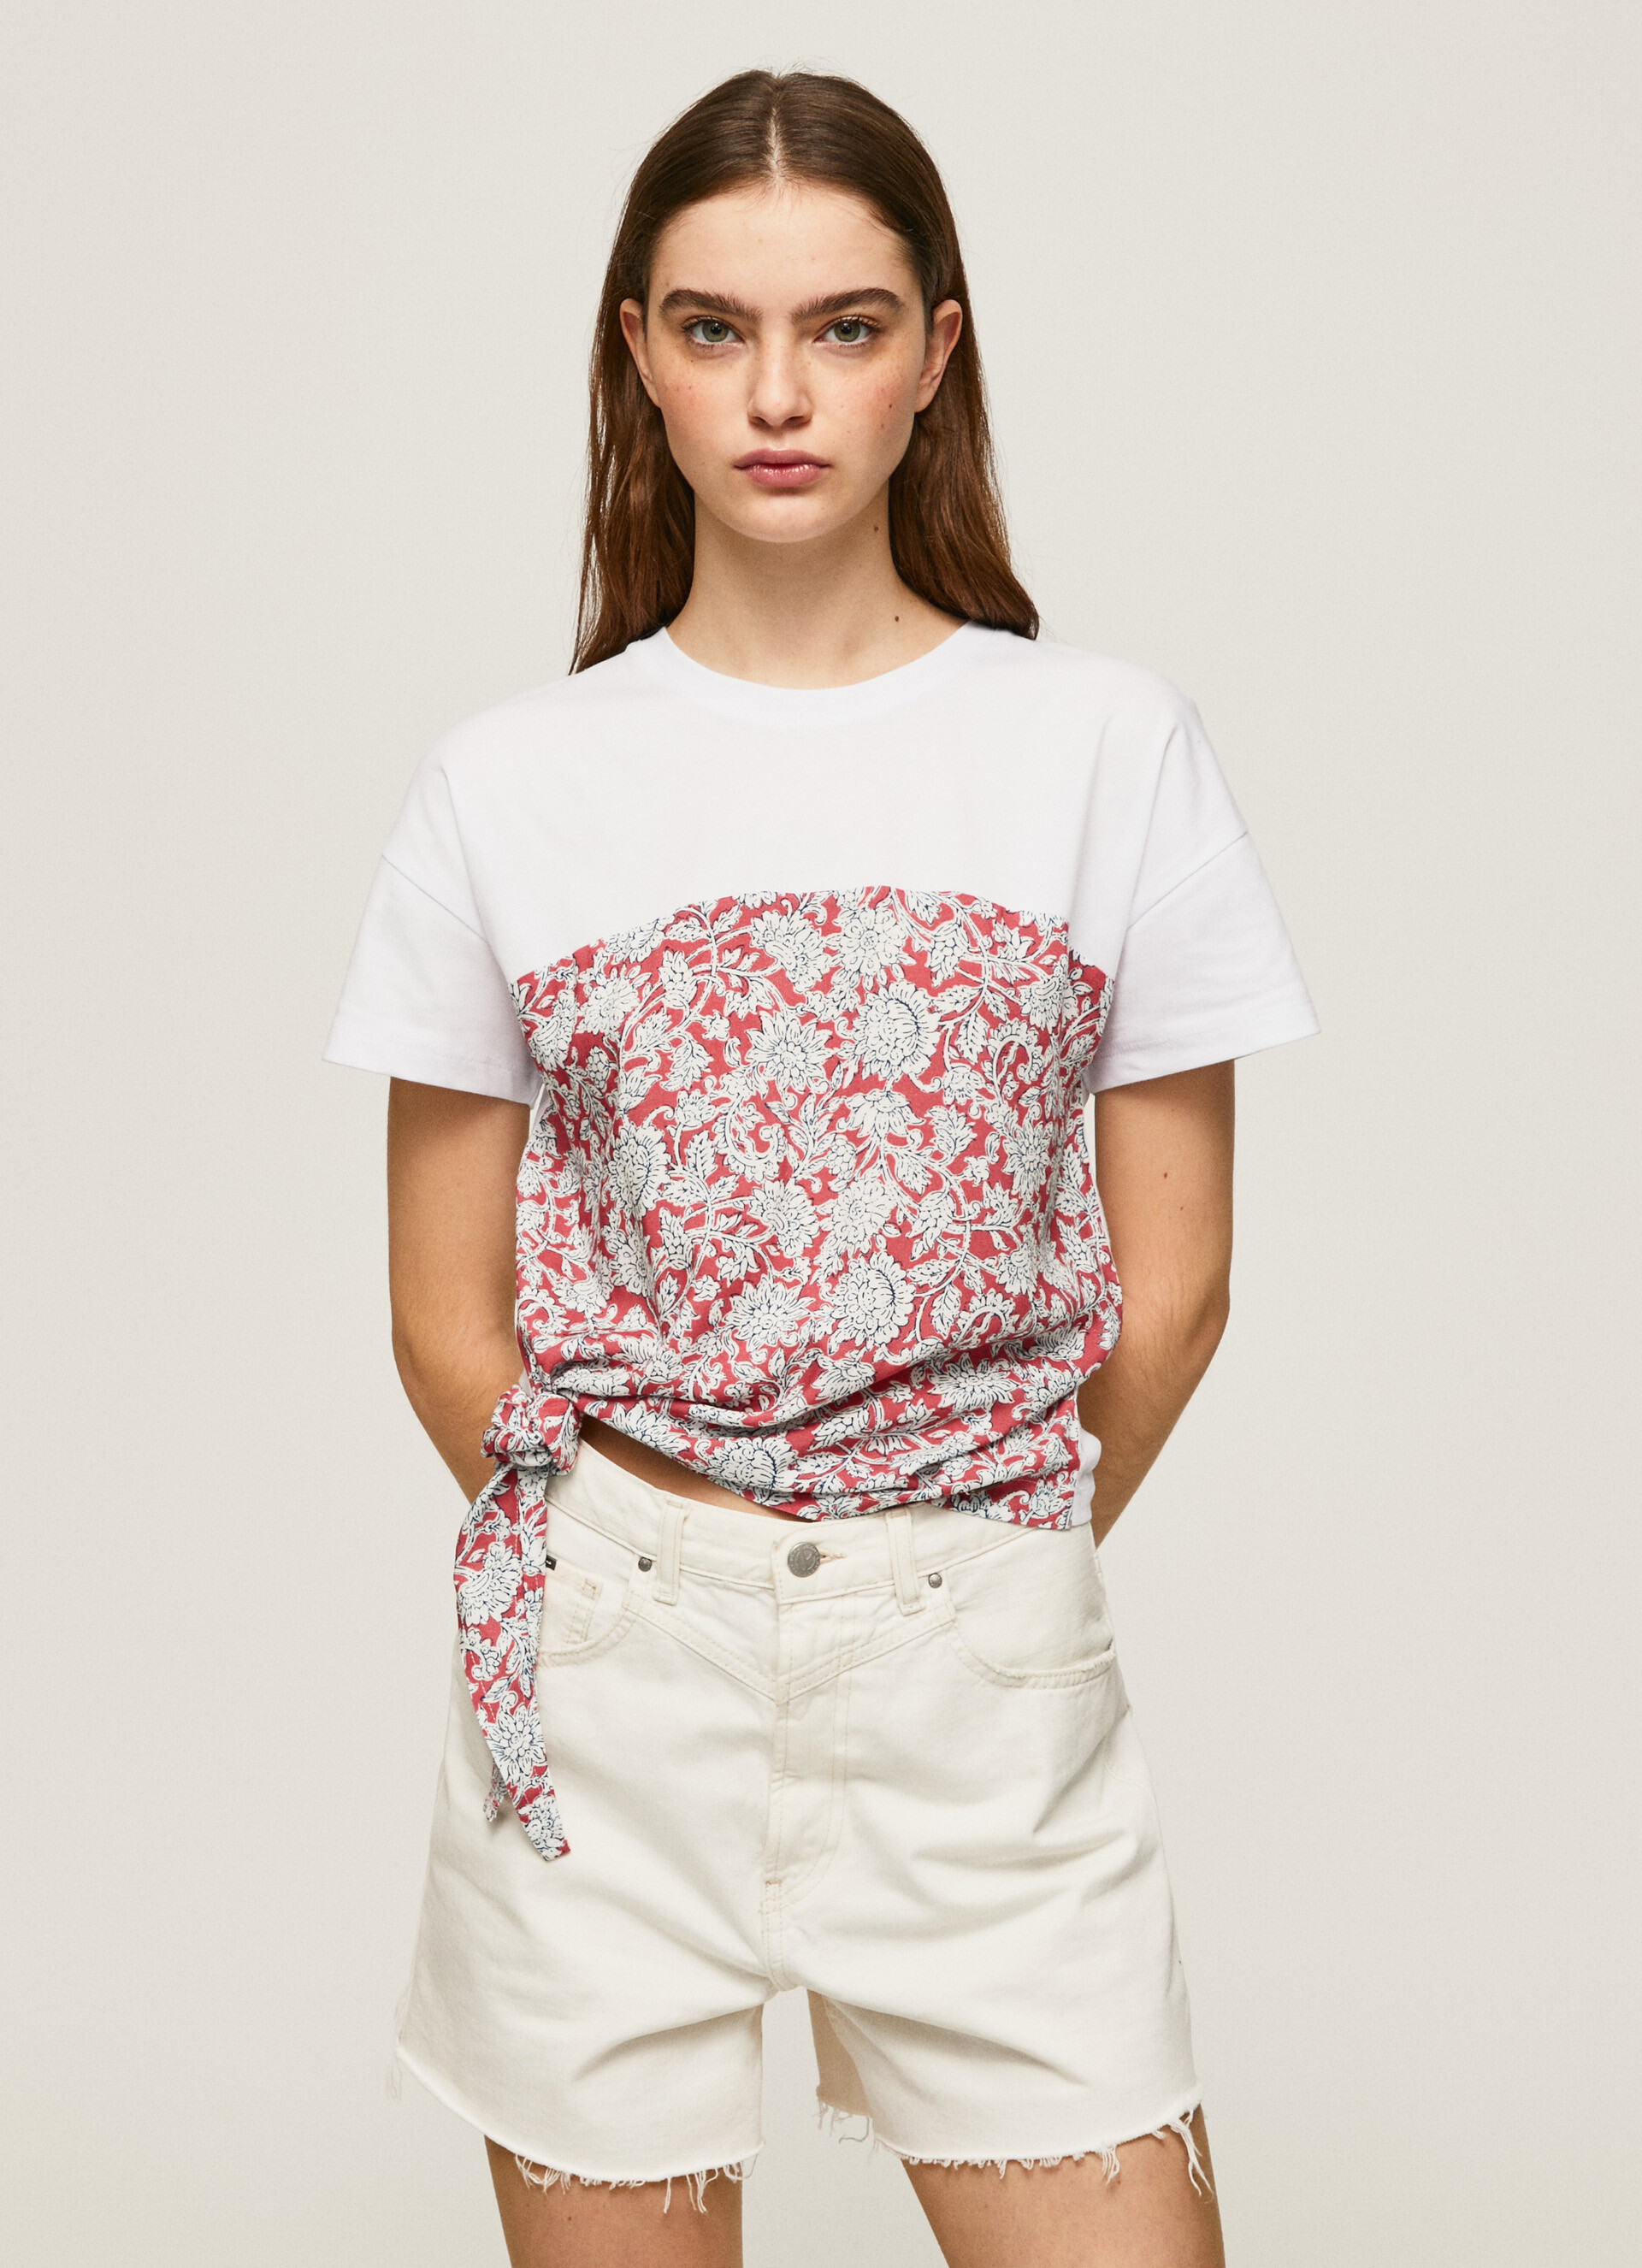 Pepe Jeans - T-shirt a fantasia in cotone, Rosso, large image number 3